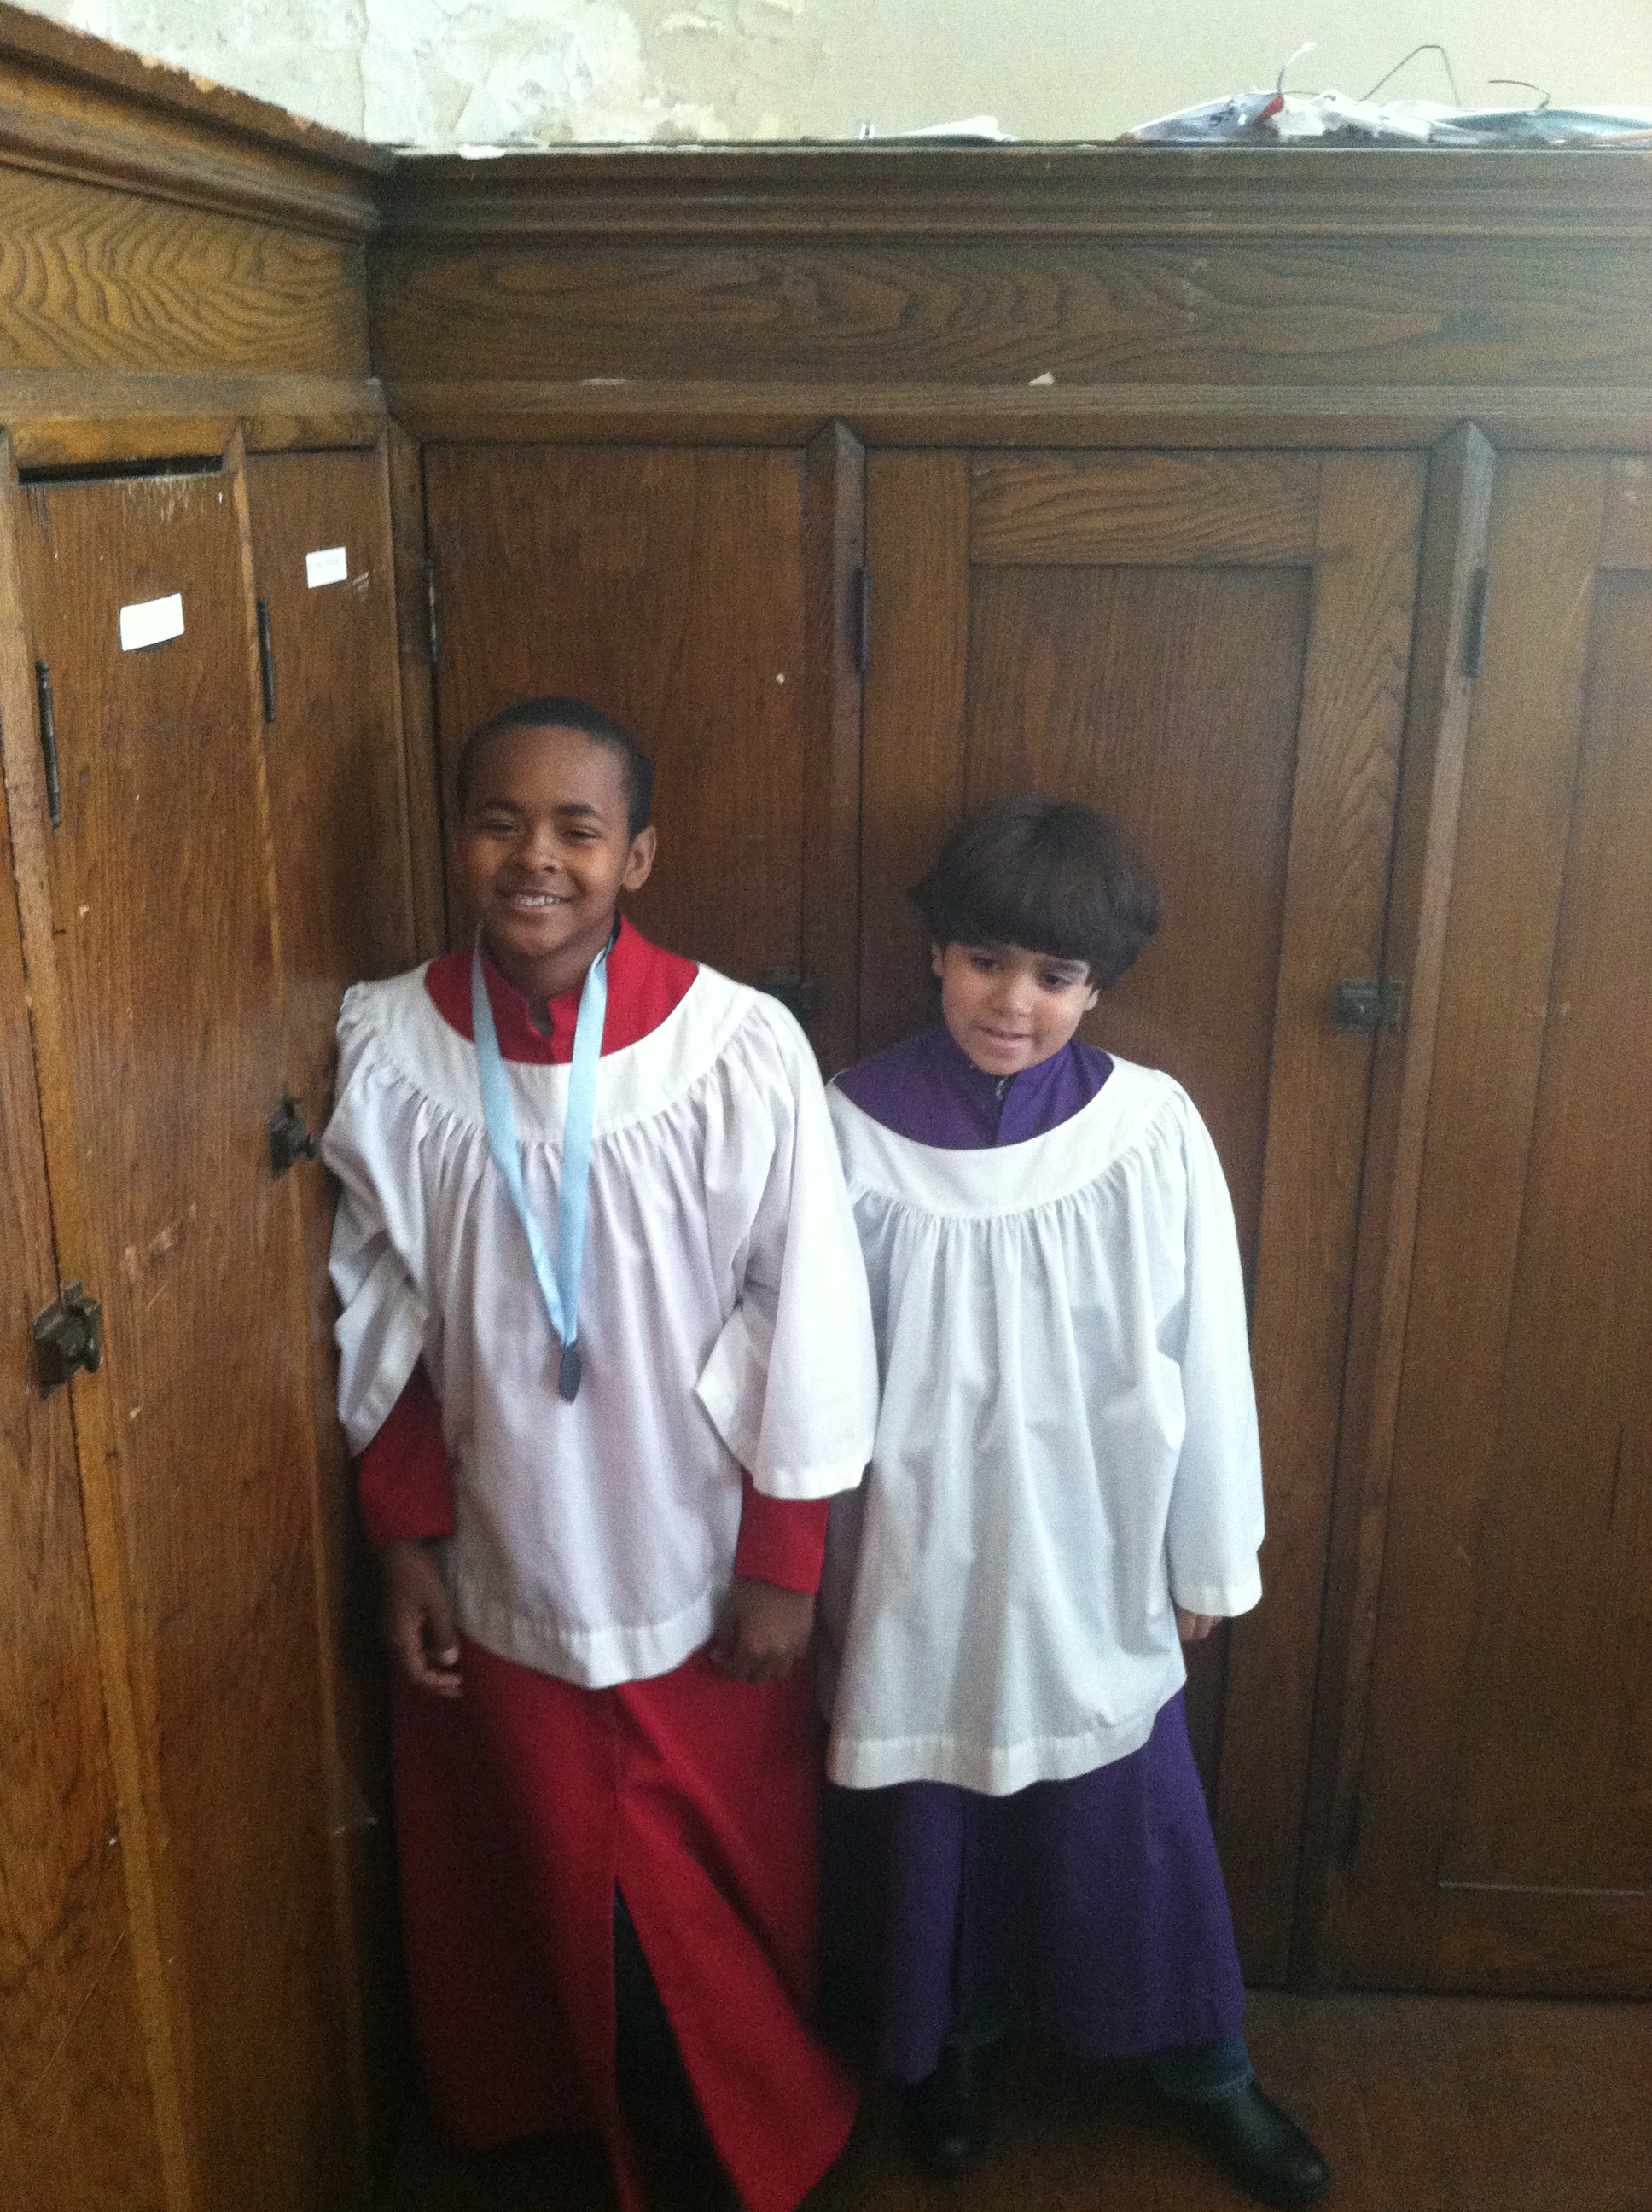 Choristers from St Paul's, Englewood and Washington Heights Choir School.